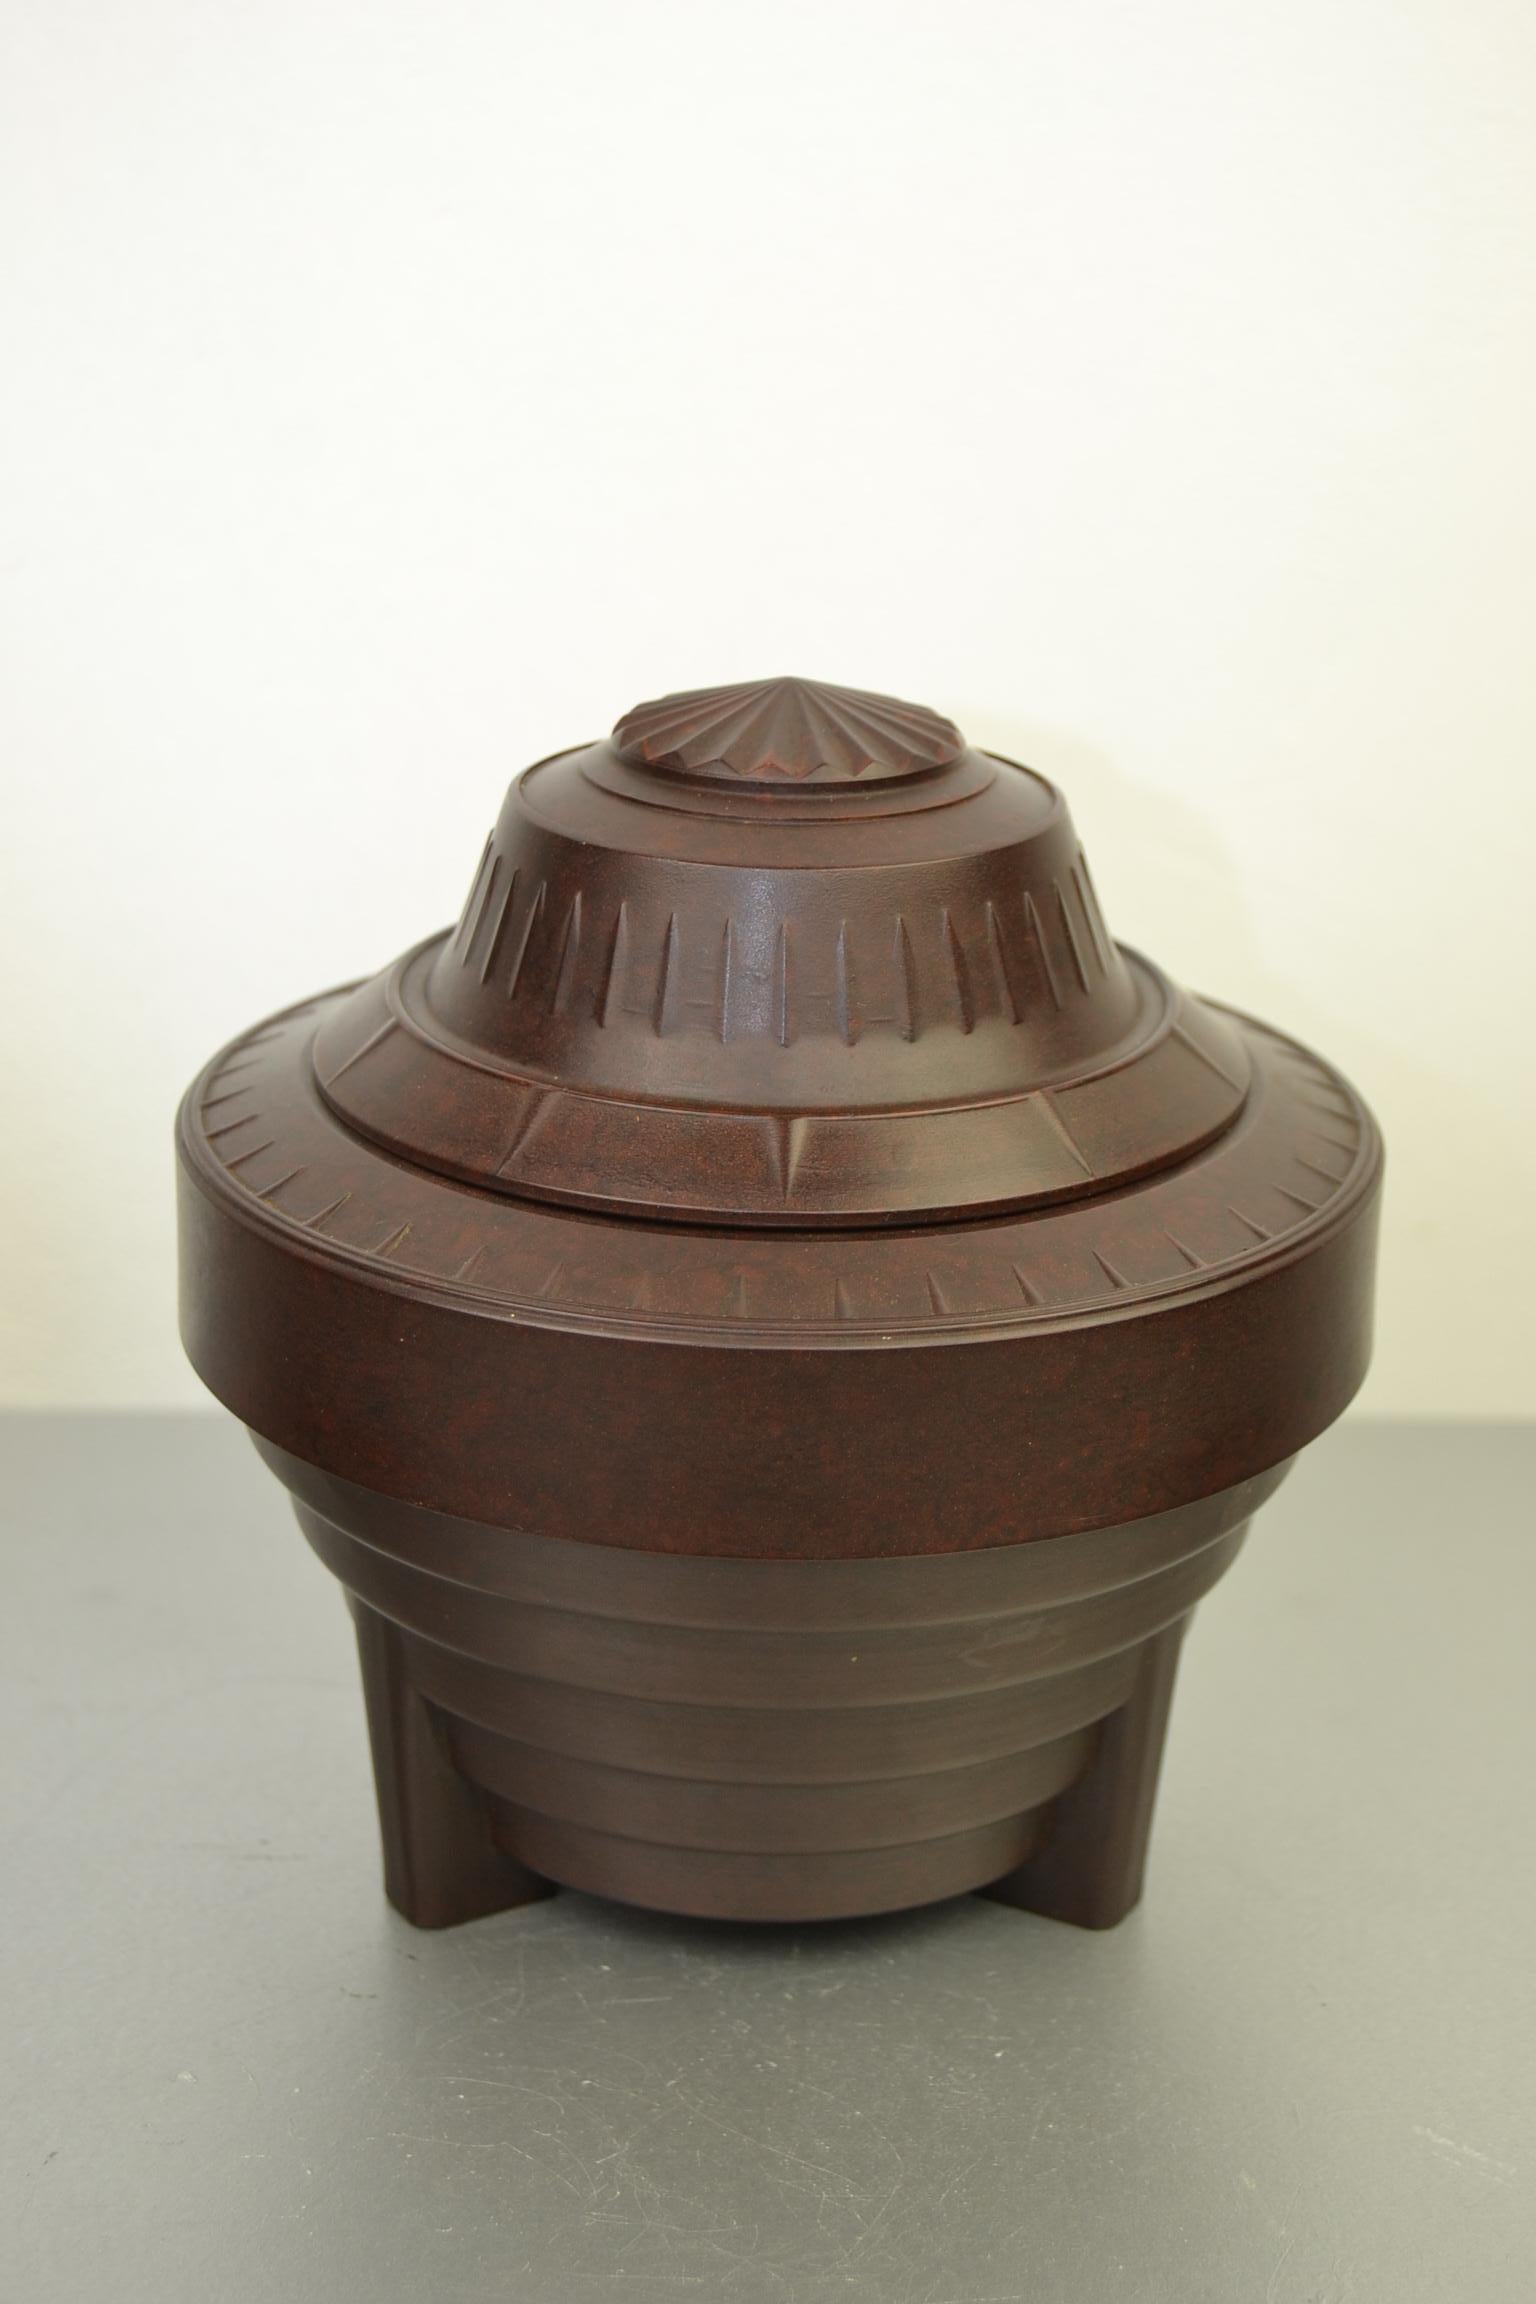 Art Deco Bakelite tobacco Jar - Tobacco box. 
This Bakelite decorative box has a great design and shape : 
looks UFO shaped - space style - an UFO on legs ready to take off.

This brown bakelite box from the 1920s-1930s has a lid wich can be